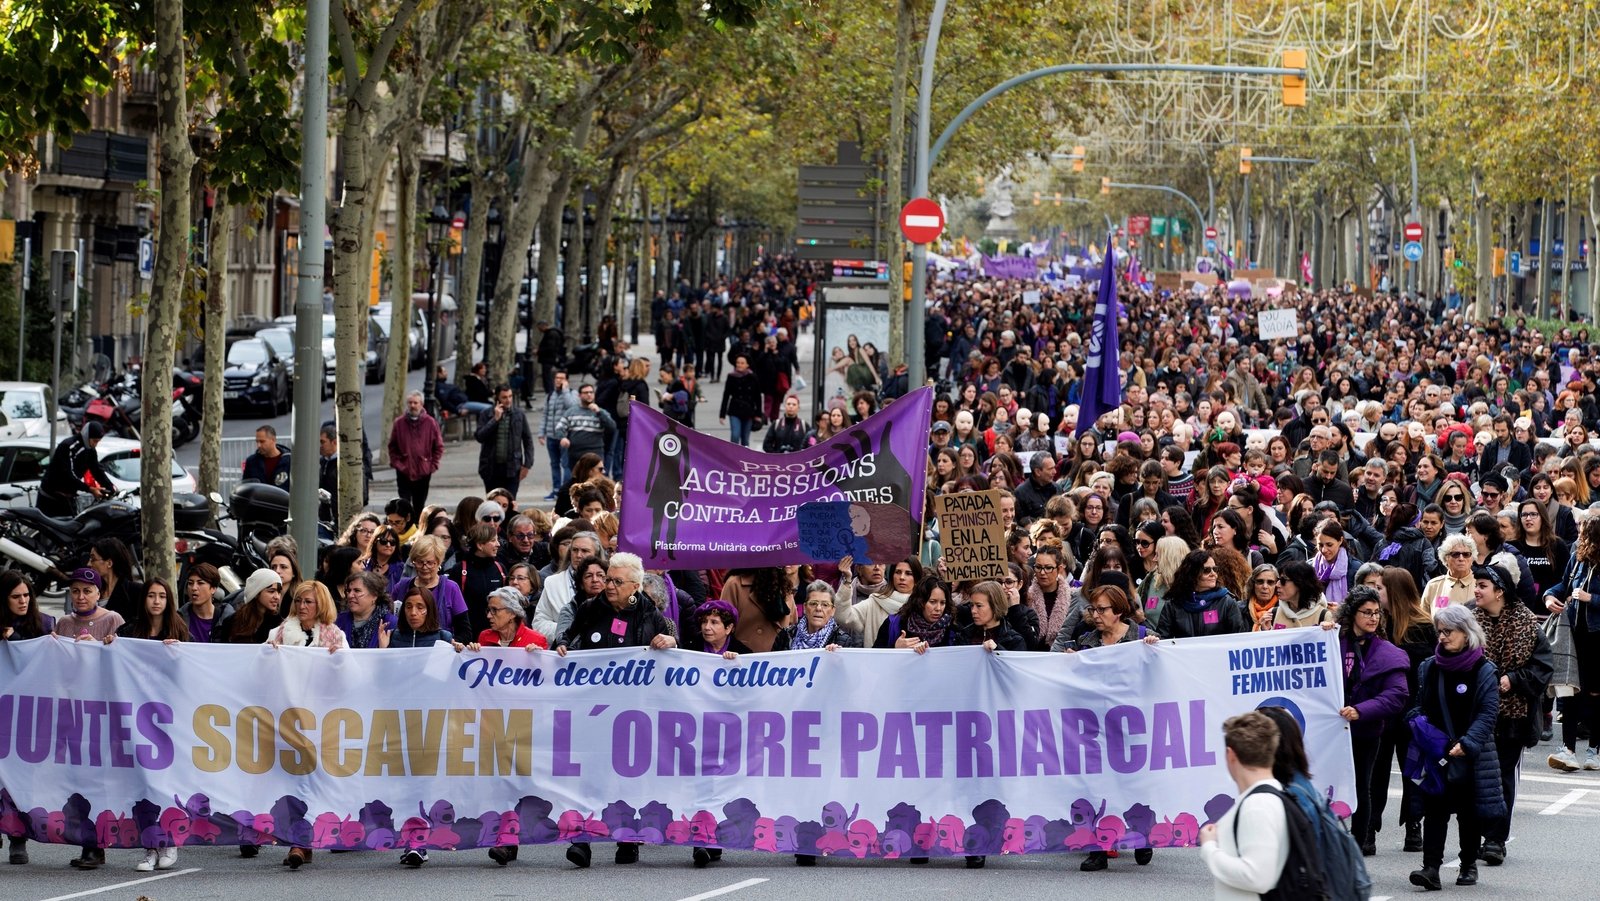 Thousands protest in Spain over violence against women